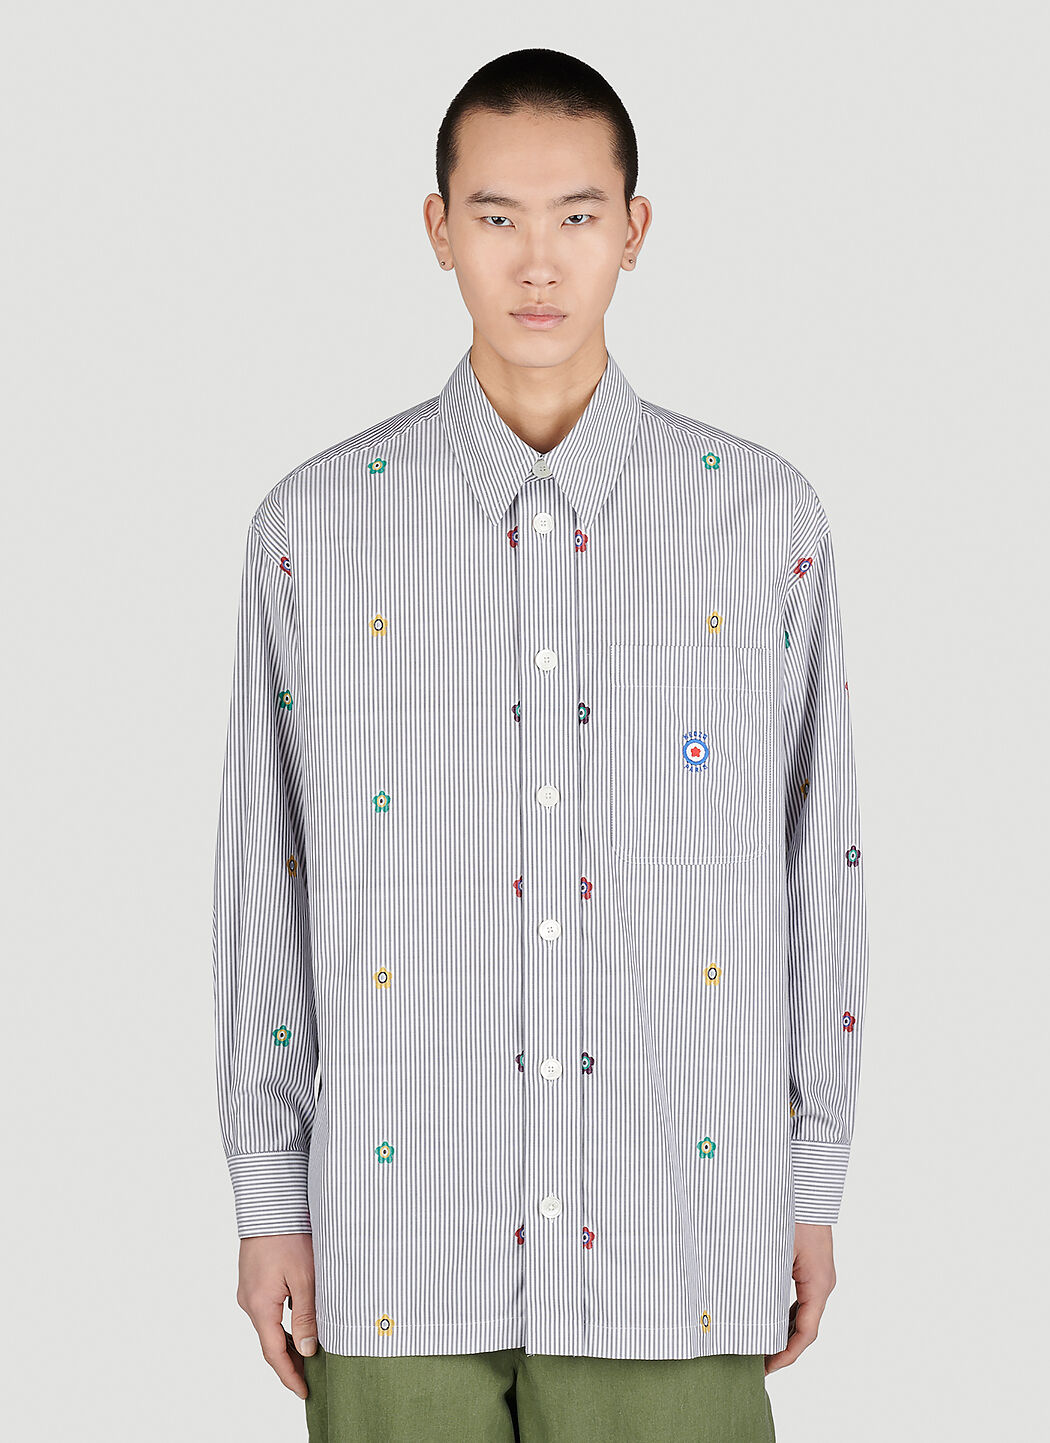 Kenzo x Levi's Embroidered Oversized Striped Shirt Blue klv0156002